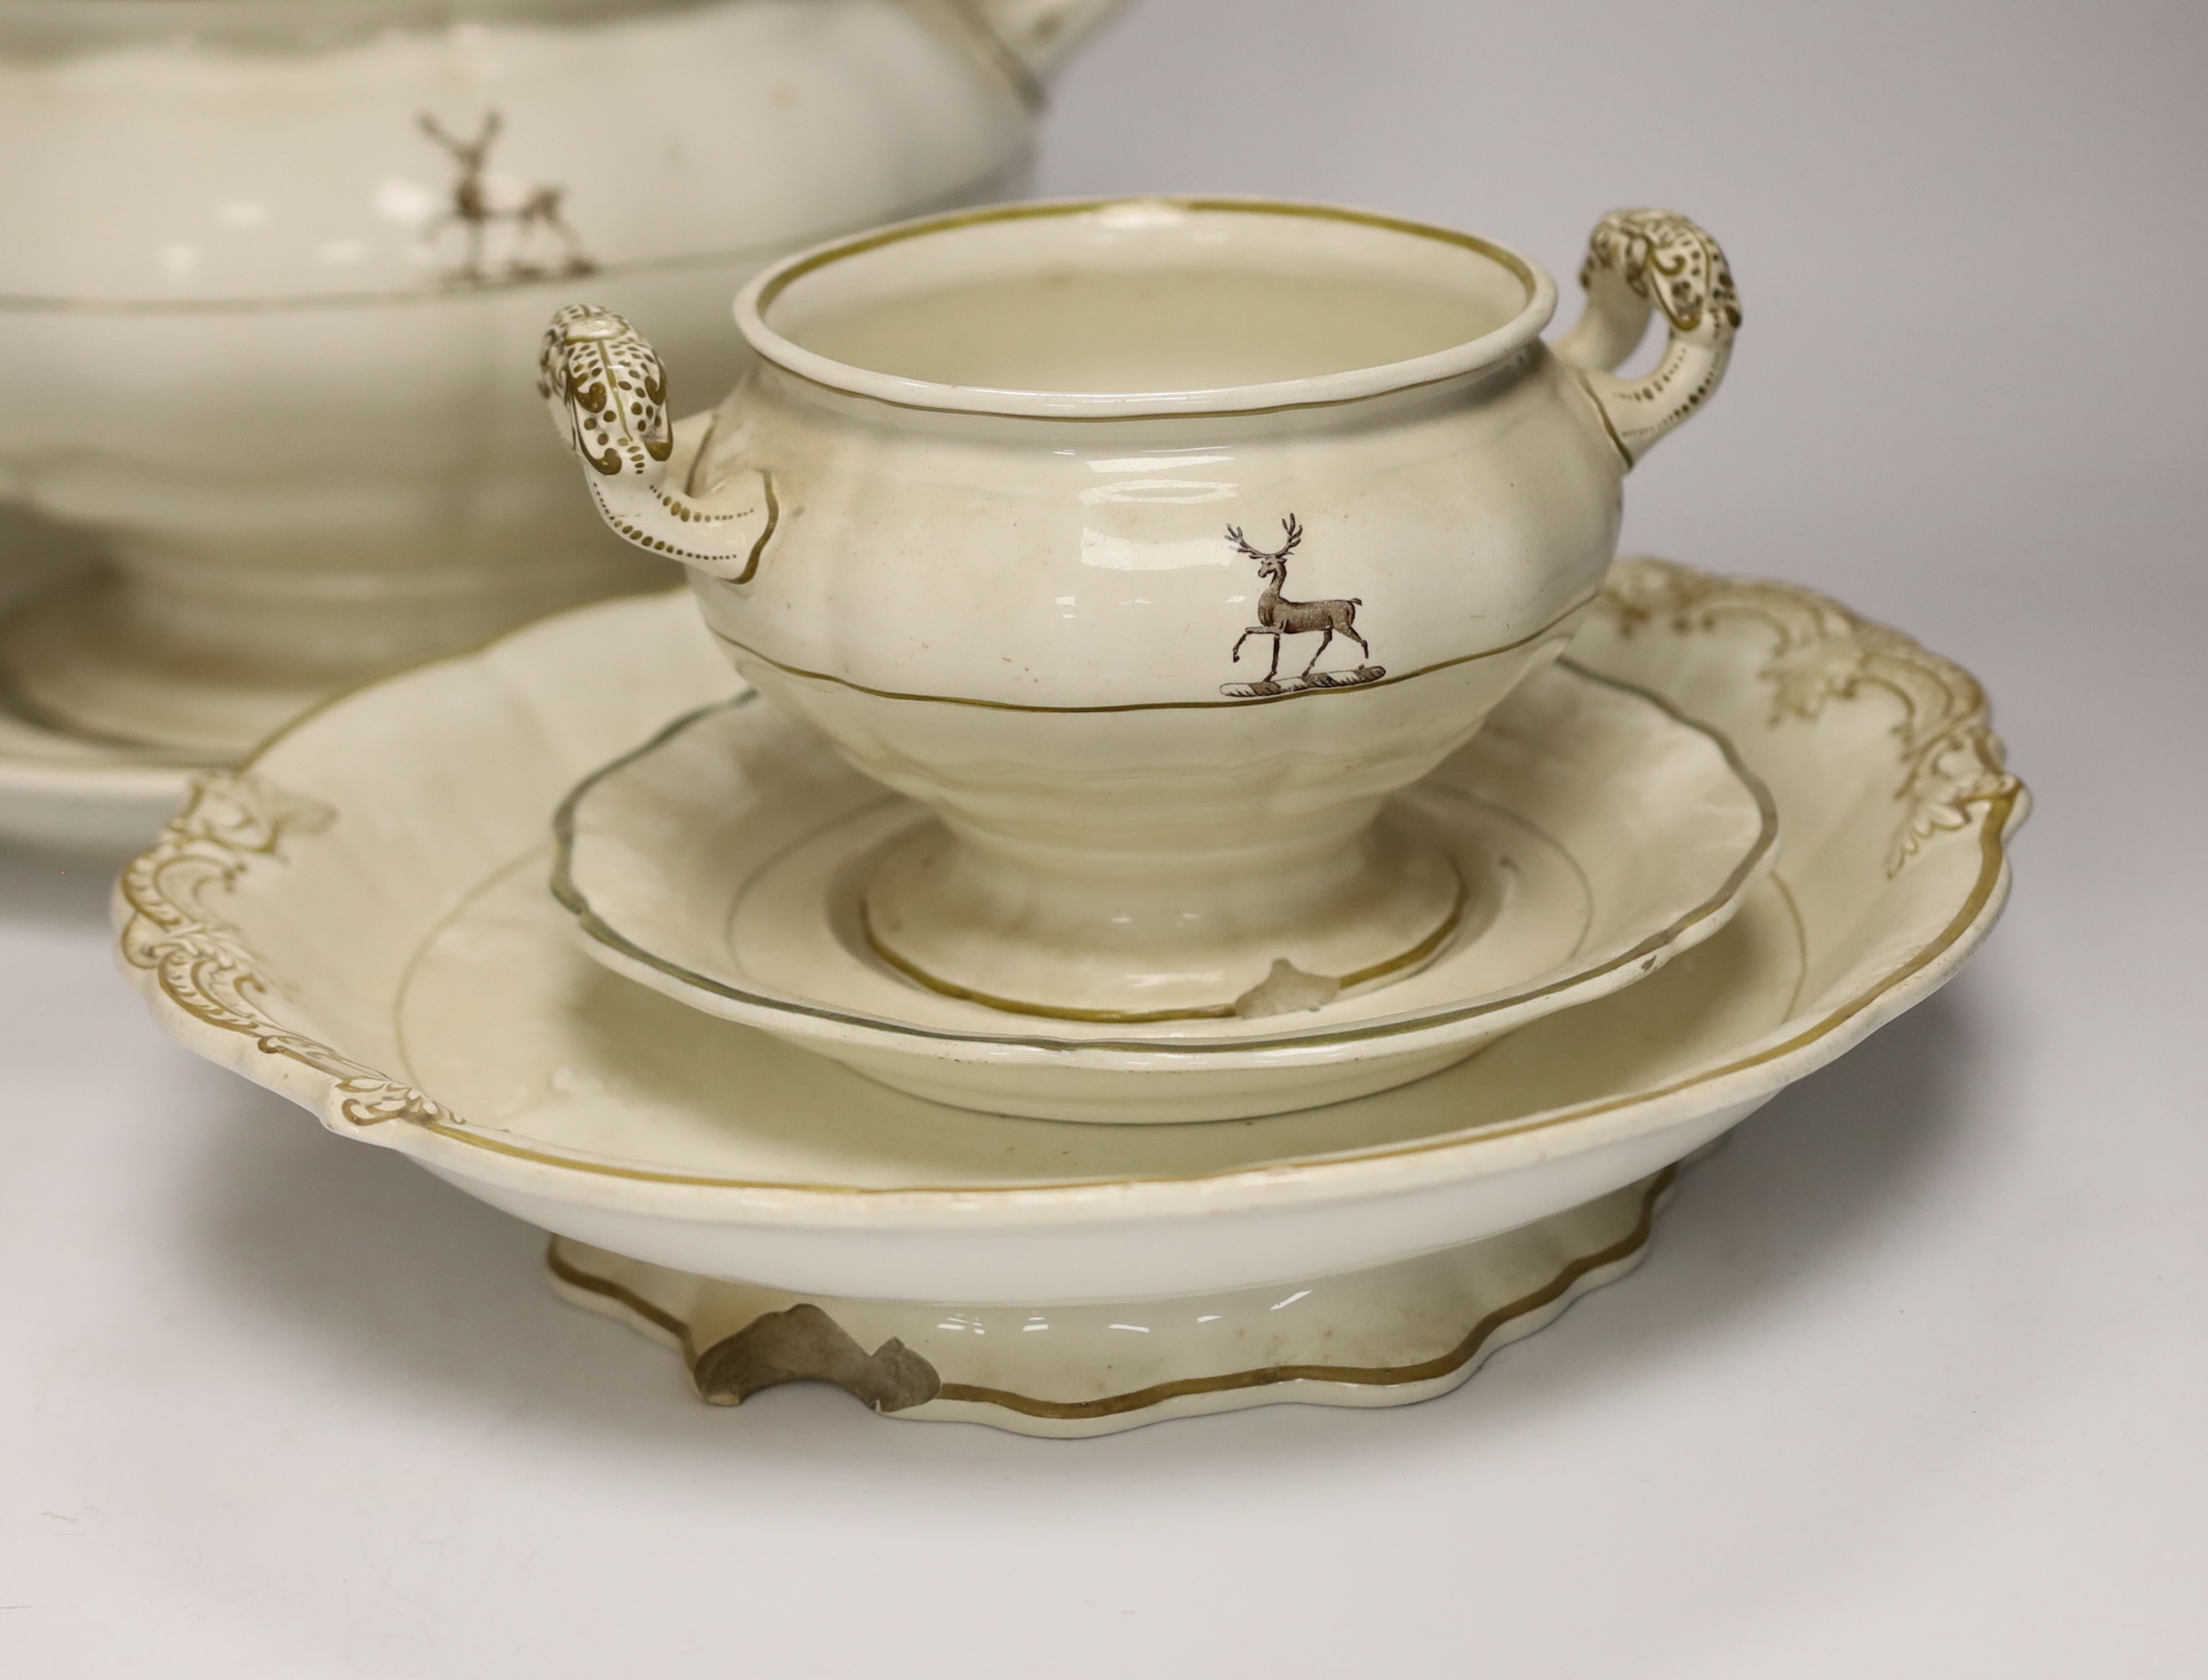 Copeland late Spode crested part dinner set comprising tureen and stand, bowl and stand and two - Image 2 of 5